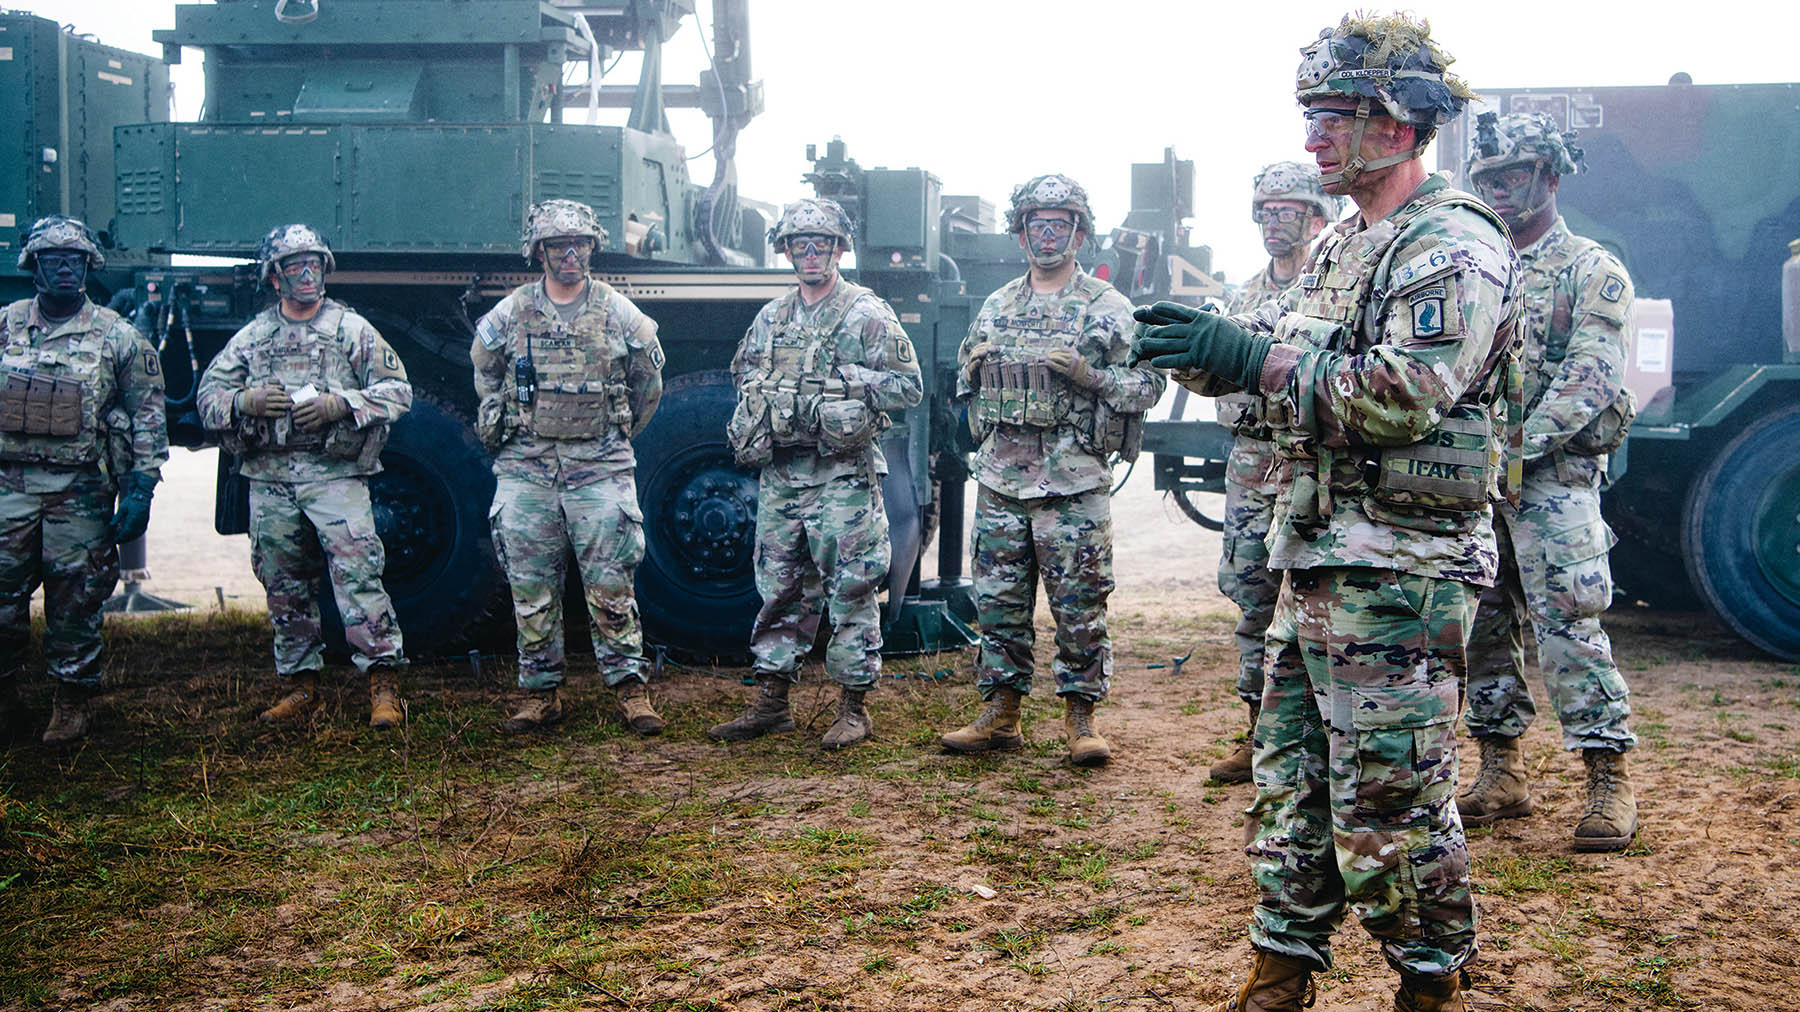 Col. Michael Kloepper, right, commander of the 173rd Airborne Brigade, speaks to battalion and company commanders during a leadership validation exercise at the Joint Multinational Readiness Center, Germany.